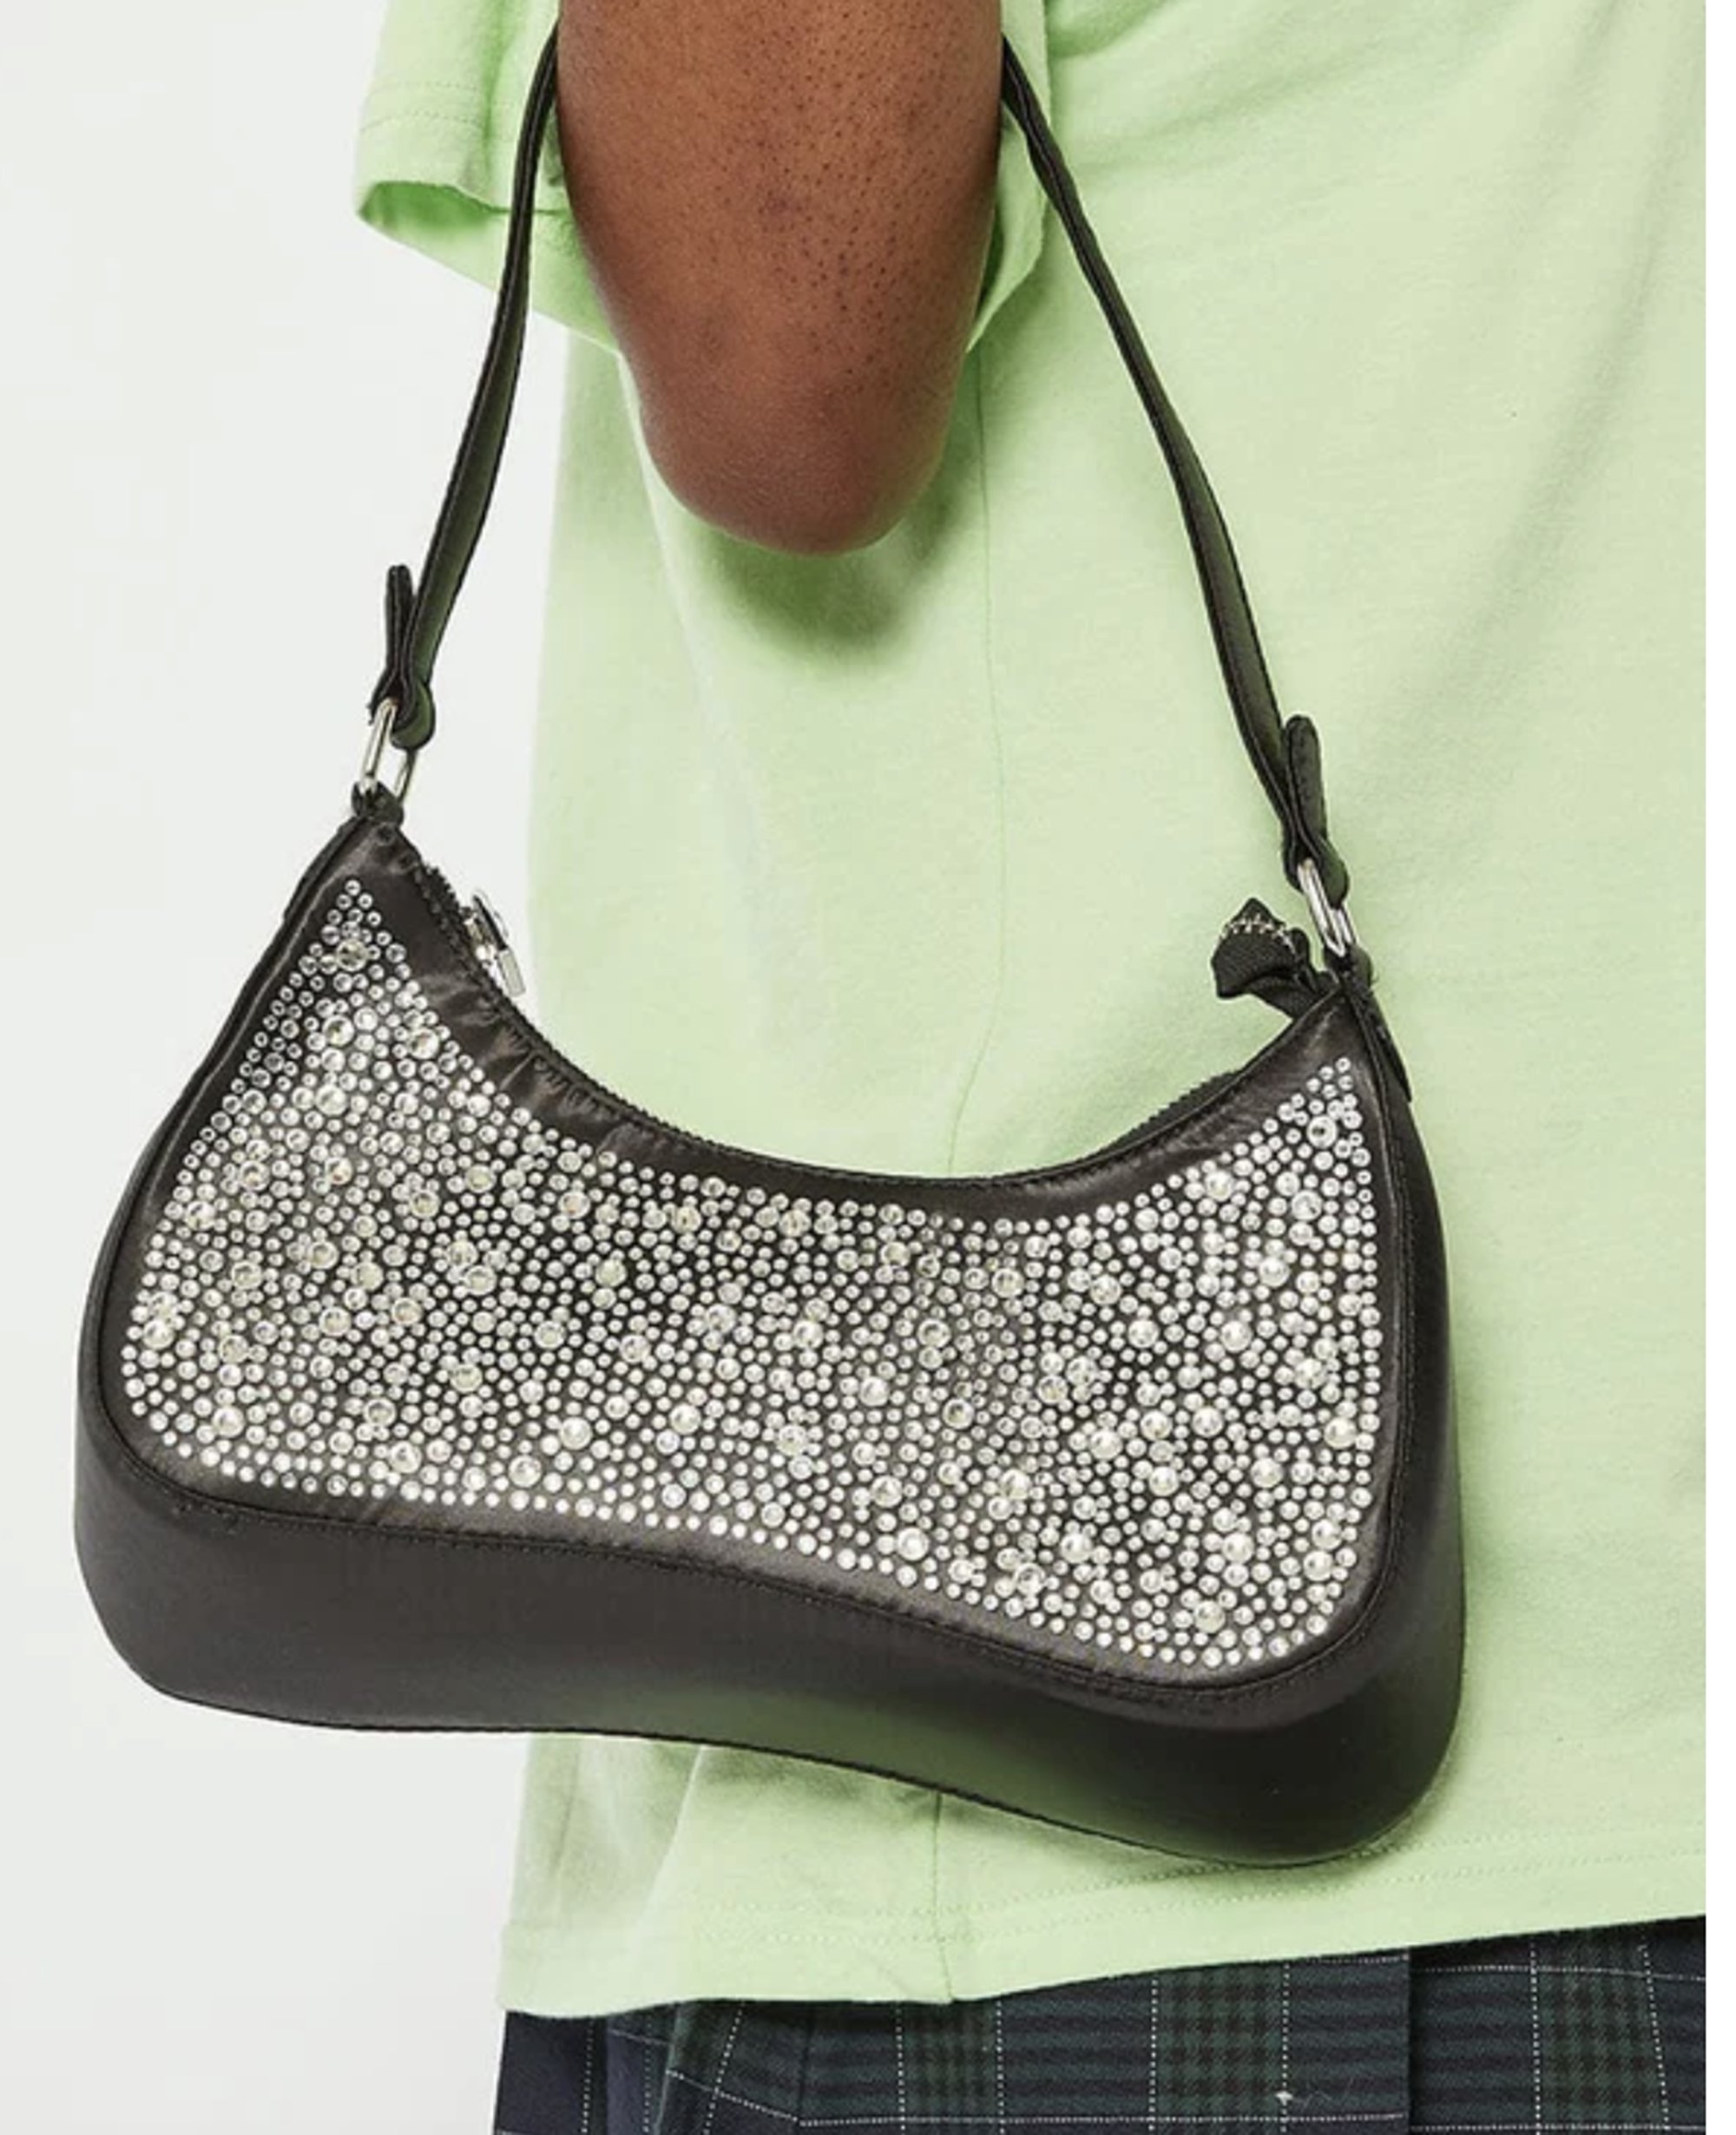 Love the Prada sequin bag? Primark's £8 dupe looks exactly the